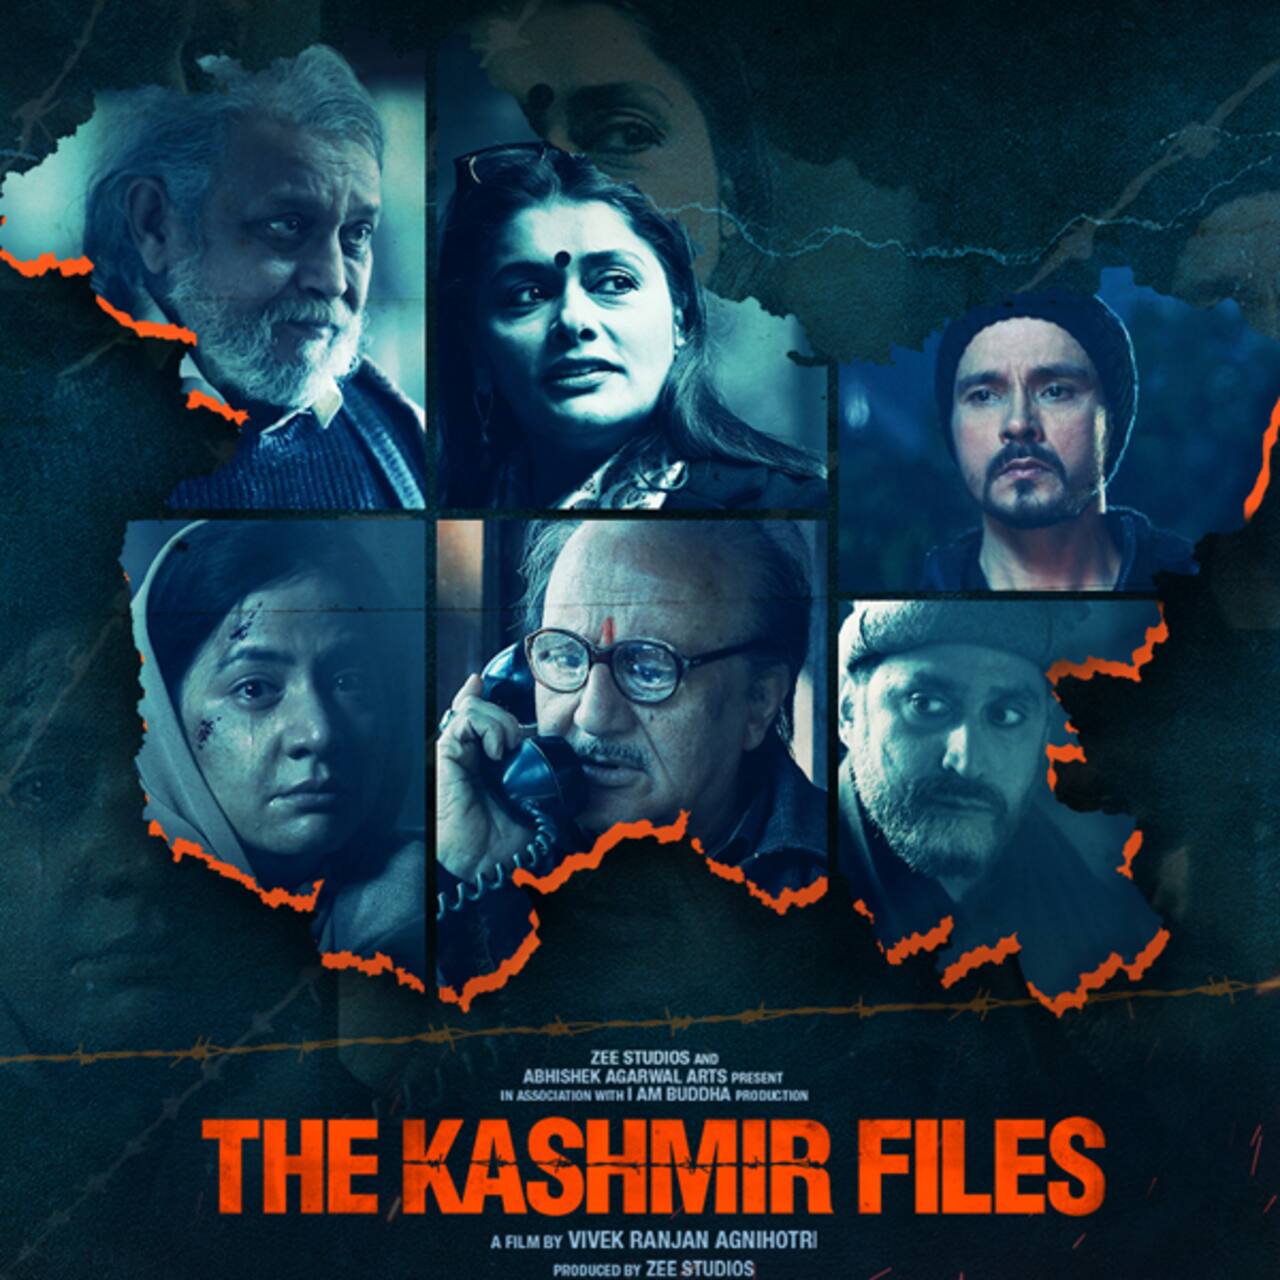 Oscars 2023: The Kashmir Files film and actors shortlisted? Netizens troll Vivek Agnihotri for 'lying'